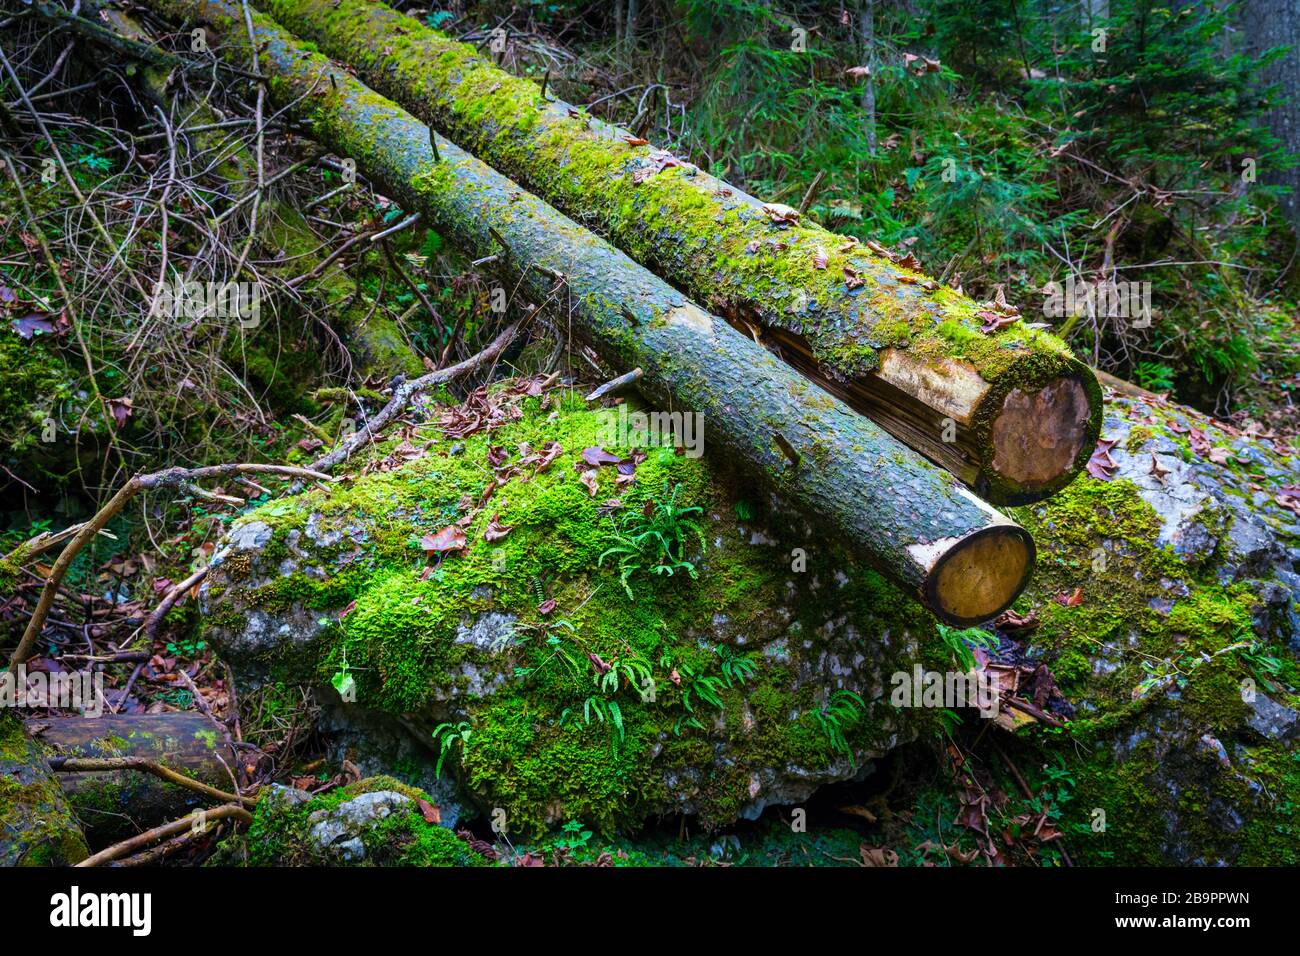 landscape with old wooden logs in deep green mossy forest Stock Photo